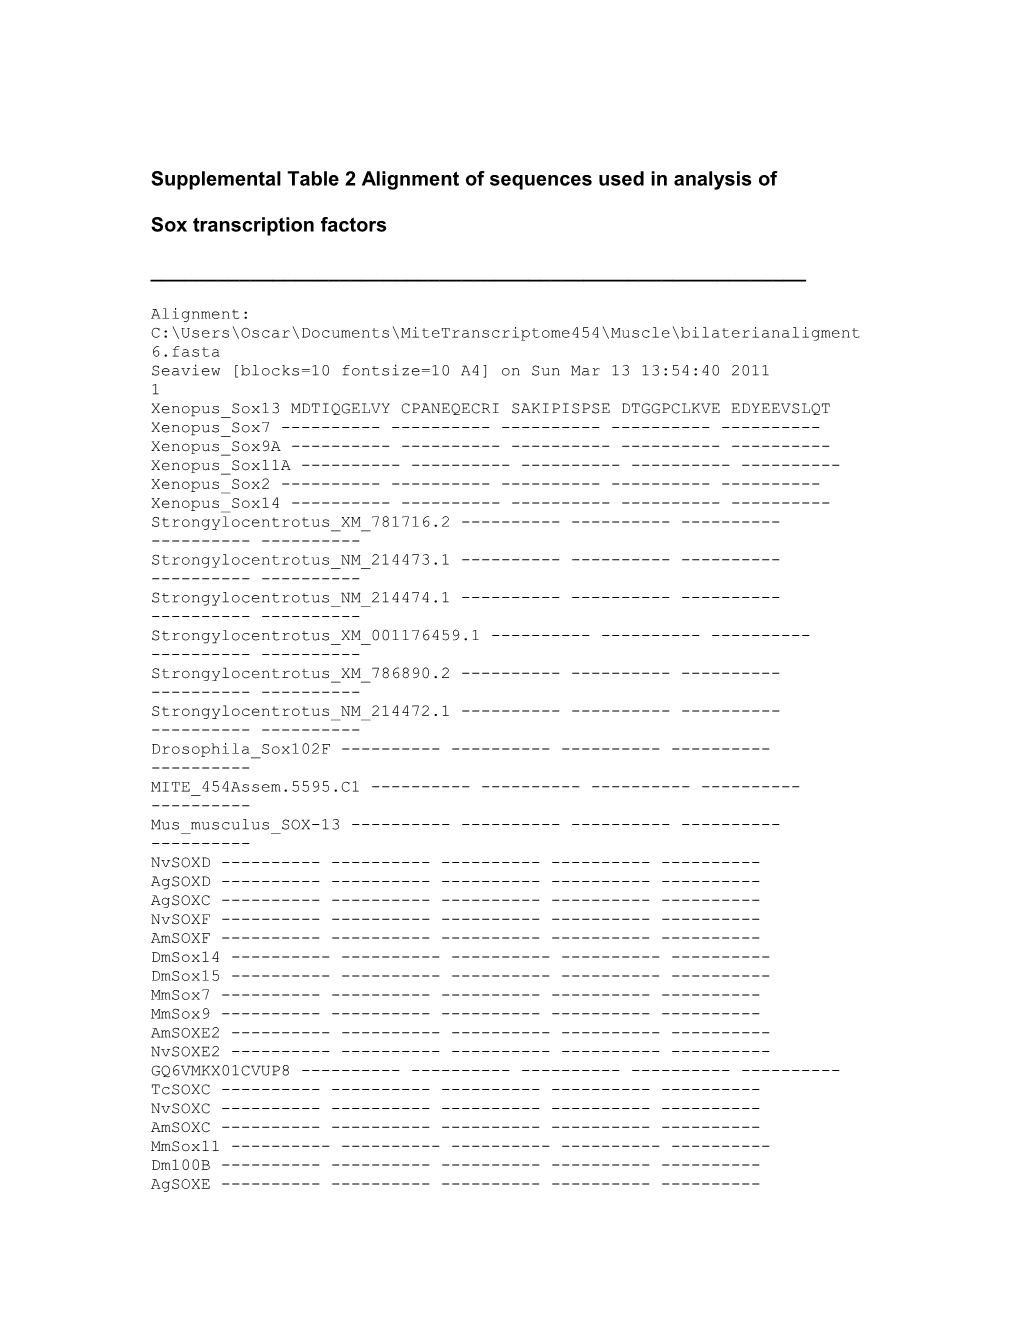 Supplemental Table 2Alignment of Sequences Used in Analysis of Sox Transcription Factors